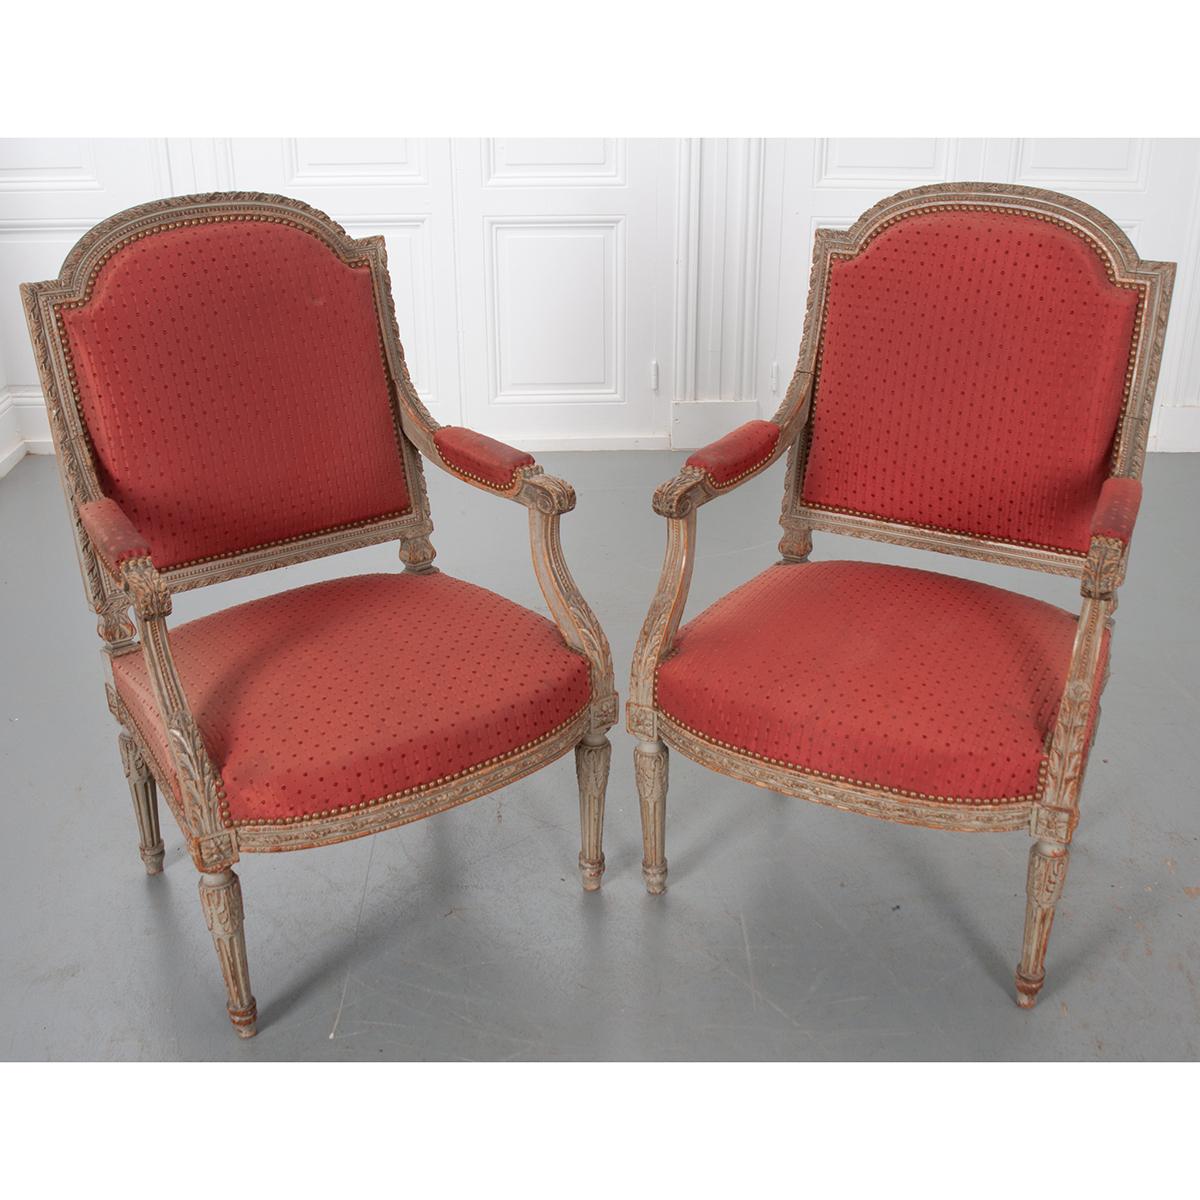 A lovely pair of painted fauteuils, upholstered in vintage red/burgundy fabric. The armchairs are beautifully carved and painted, with both the paint and hardwood acquiring an exceptional patina over time. The frame is heavily carved and sports an